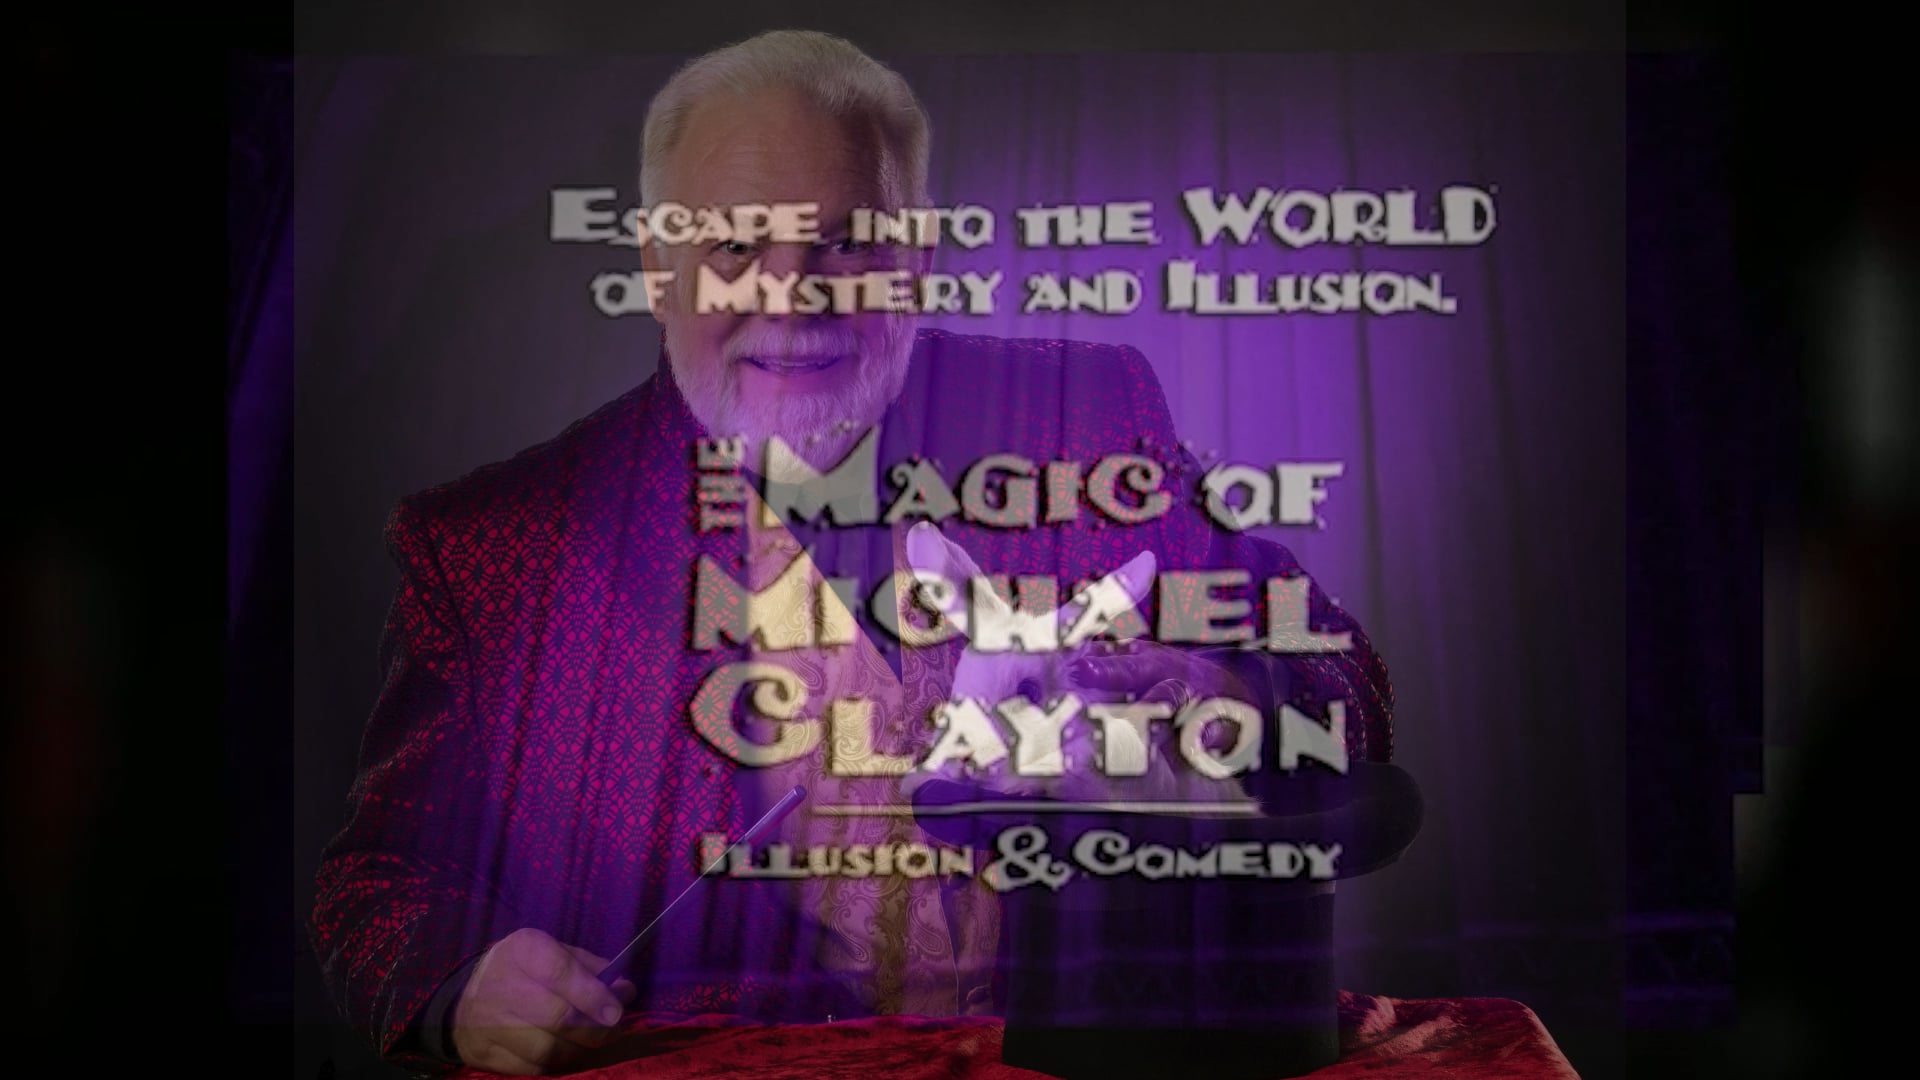 Promotional video thumbnail 1 for The Magic of Michael Clayton